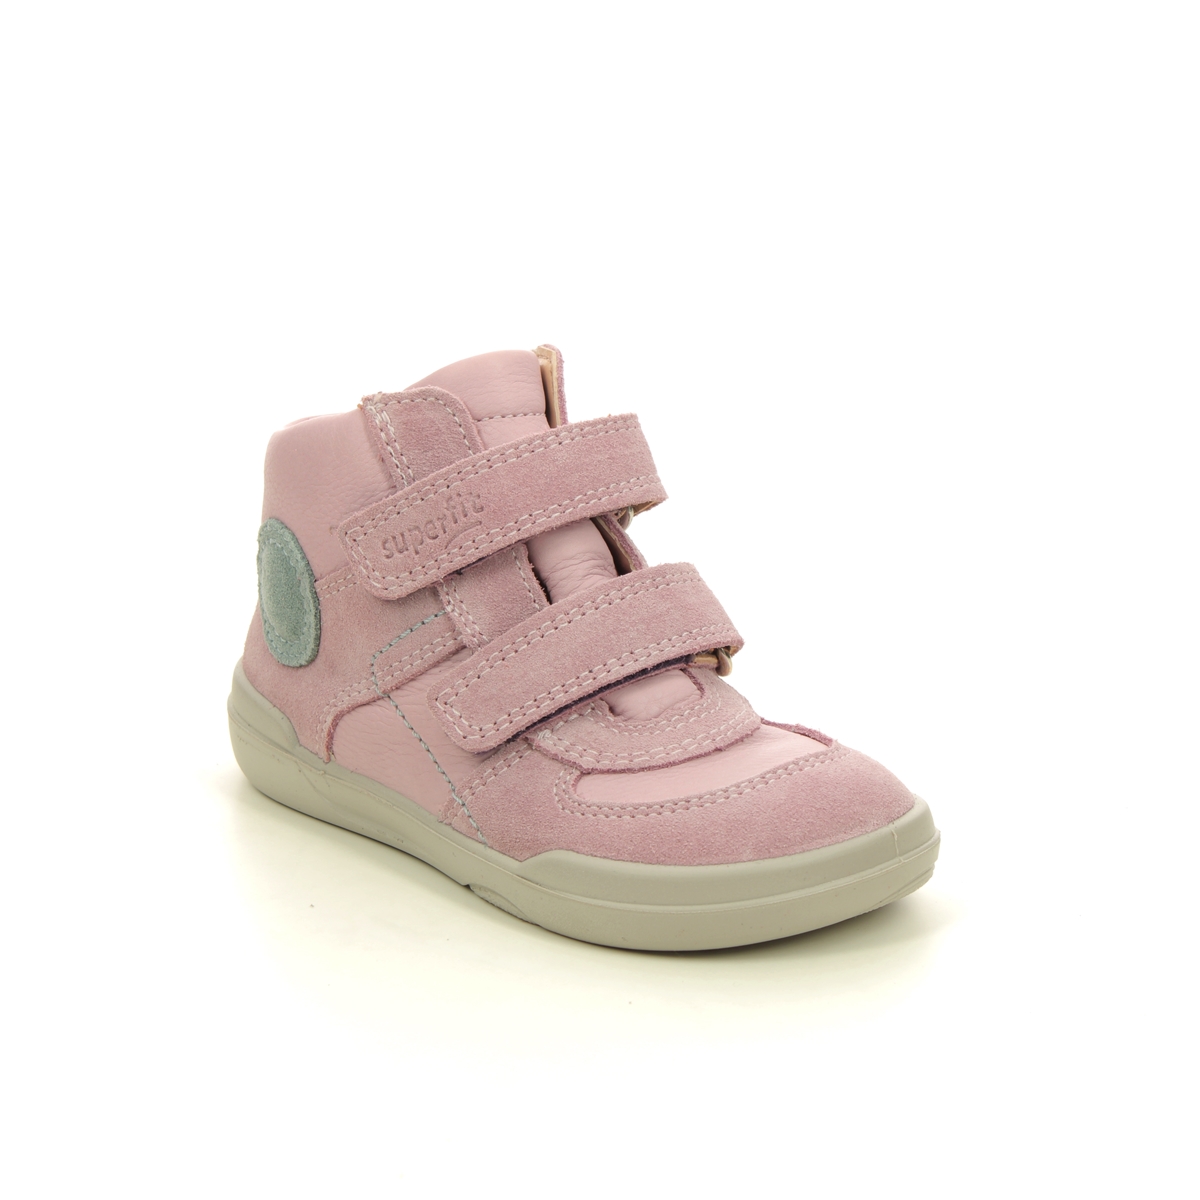 Superfit Superfree Gtx Pink Suede Kids Toddler Girls Boots 1000541-5500 In Size 25 In Plain Pink Suede